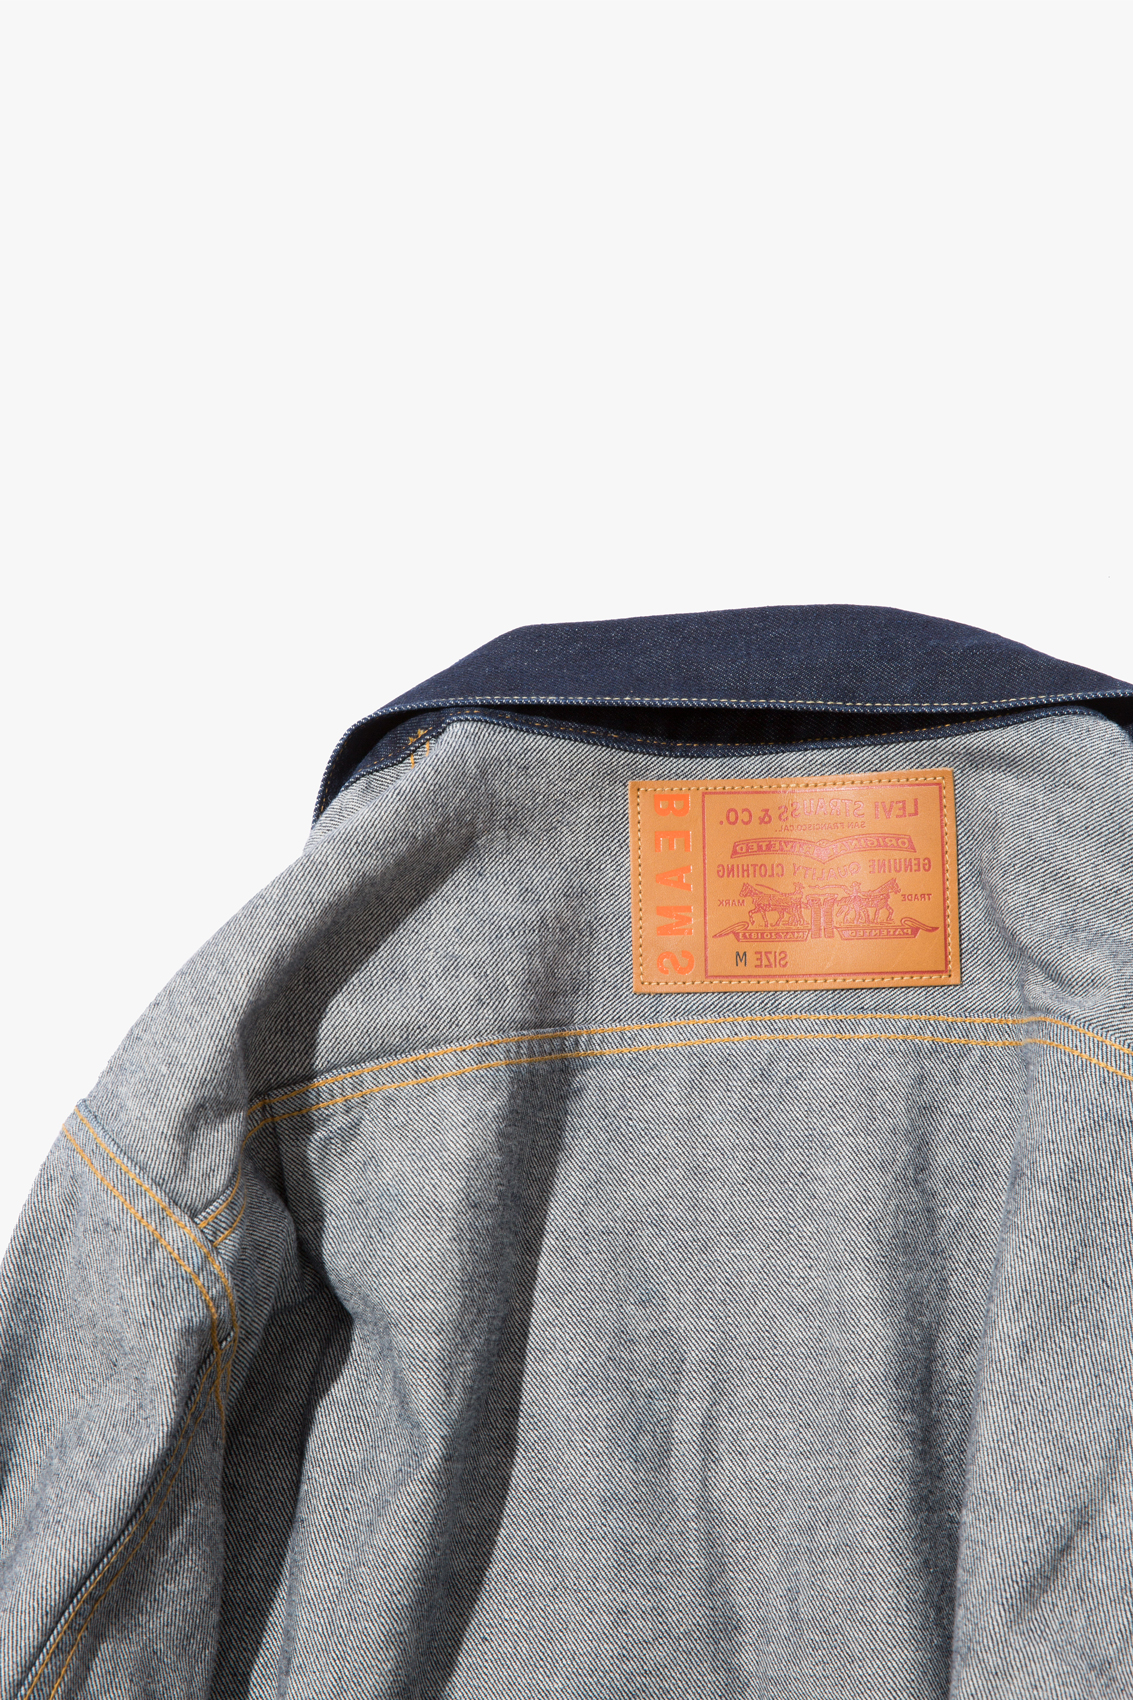 LEVI'S®×BEAMS「THE INSIDE OUT COLLECTION」が登場。リーバイスの名